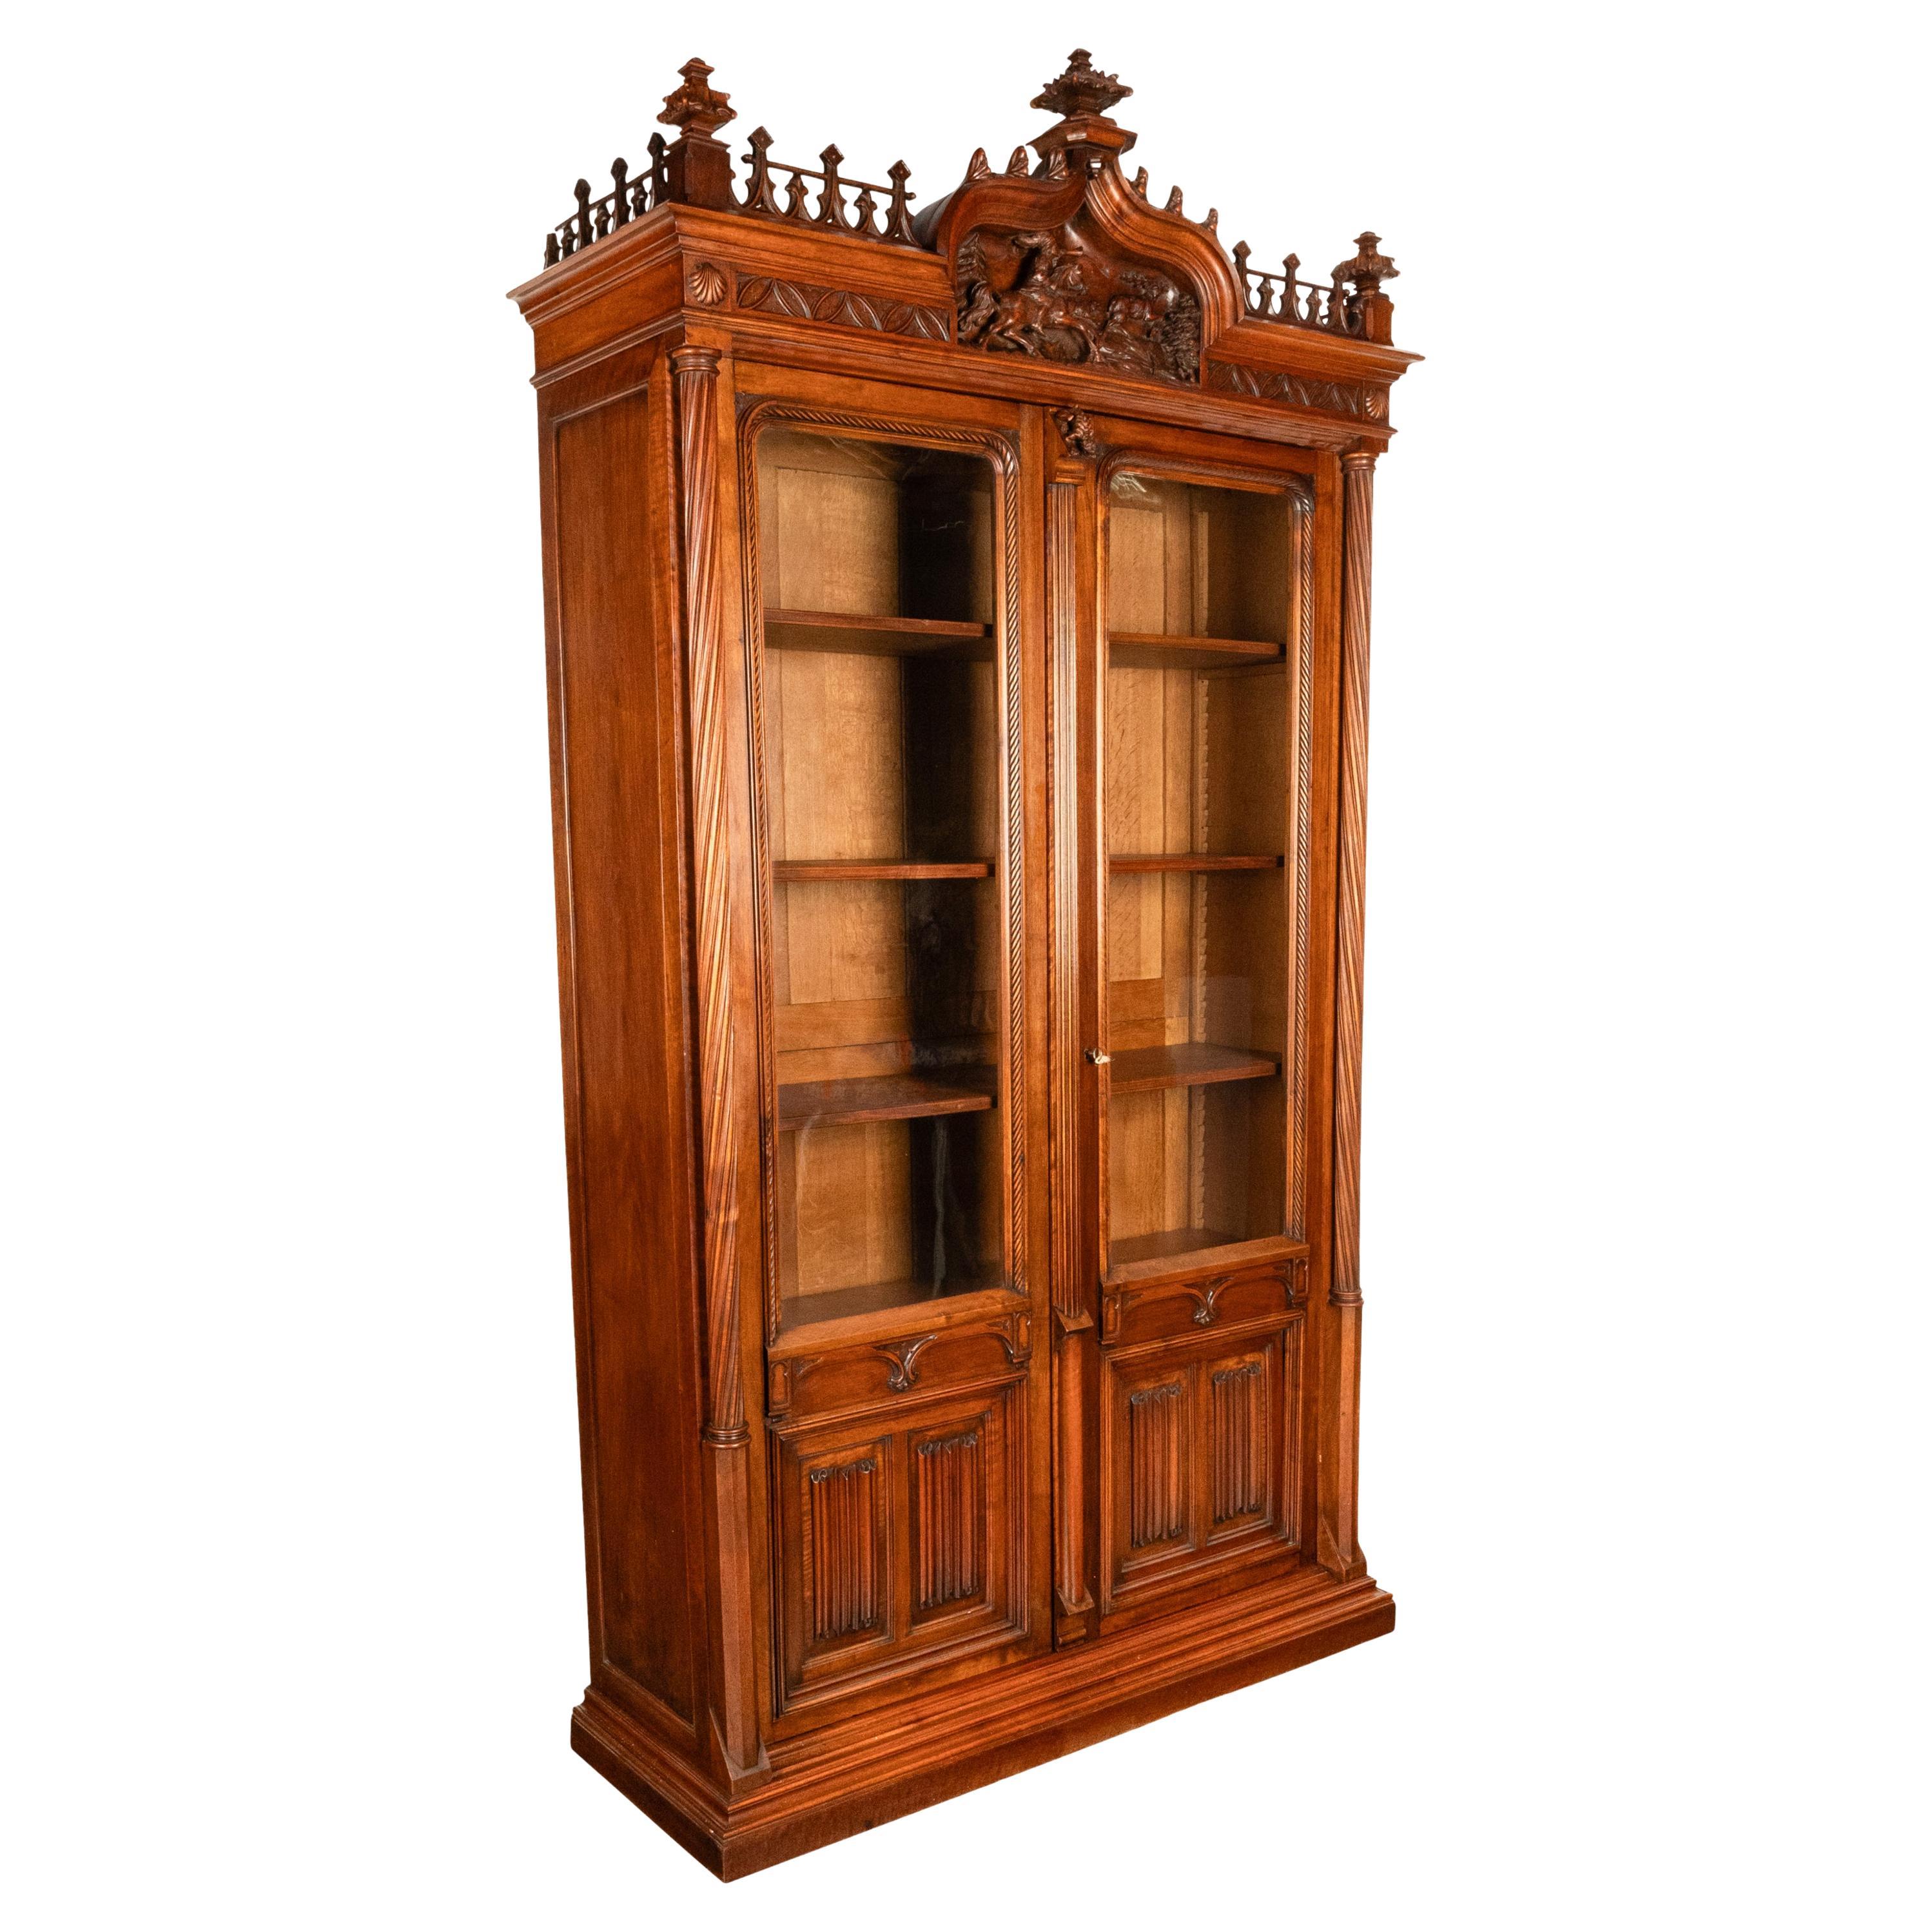 Antique French Carved Oak Gothic Revival Library Bookcase Bibliotheque 1880 In Good Condition For Sale In Portland, OR